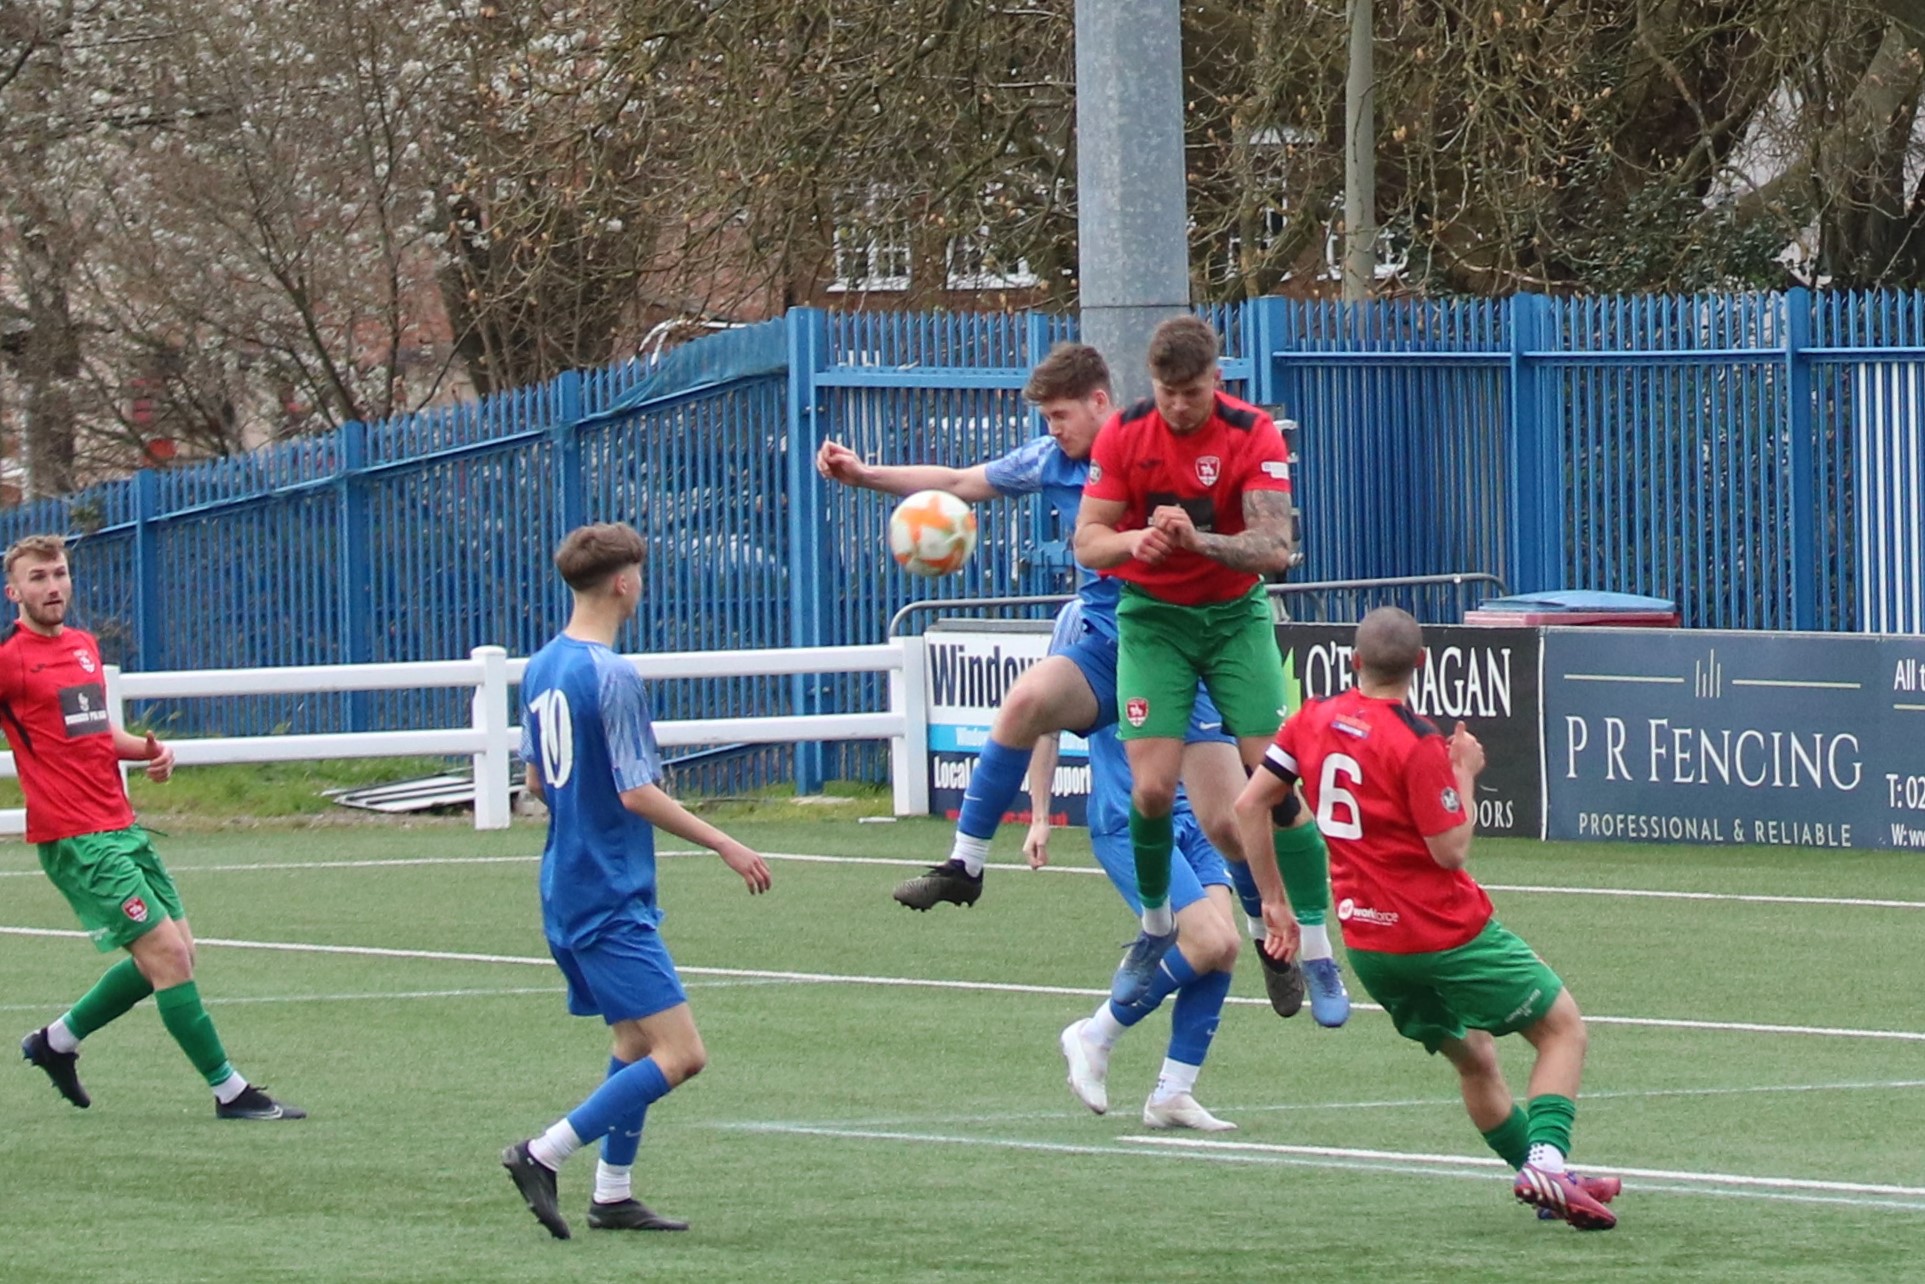 A SLICK SECOND HALF SHOWING GIVES COV UTD THE POINTS